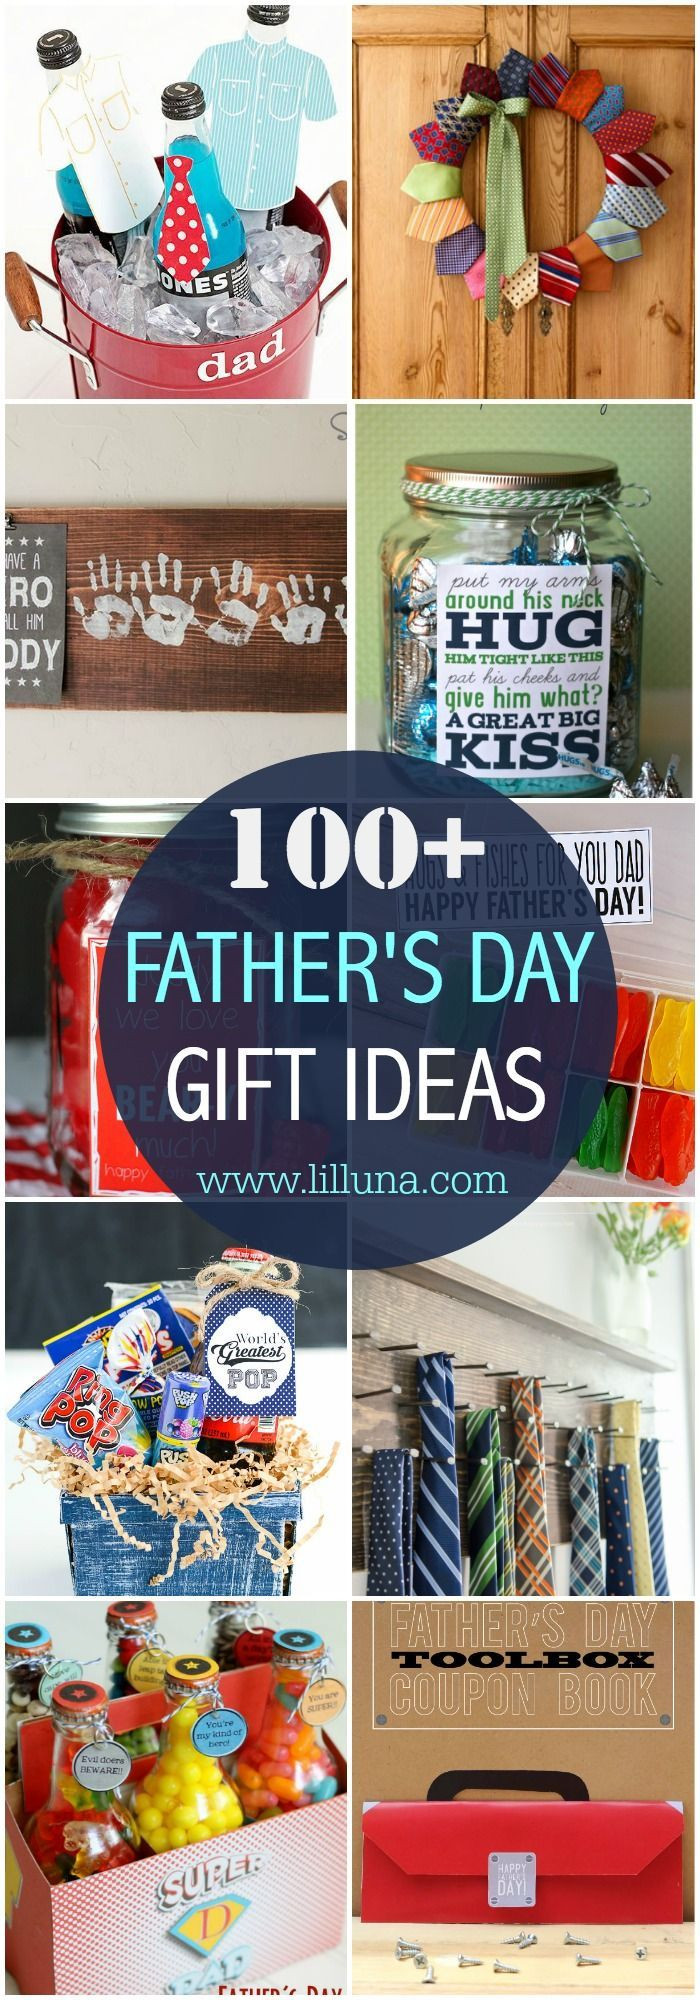 Fathers Day DIY Gifts
 838 best Father s day crafts ts and ideas images on